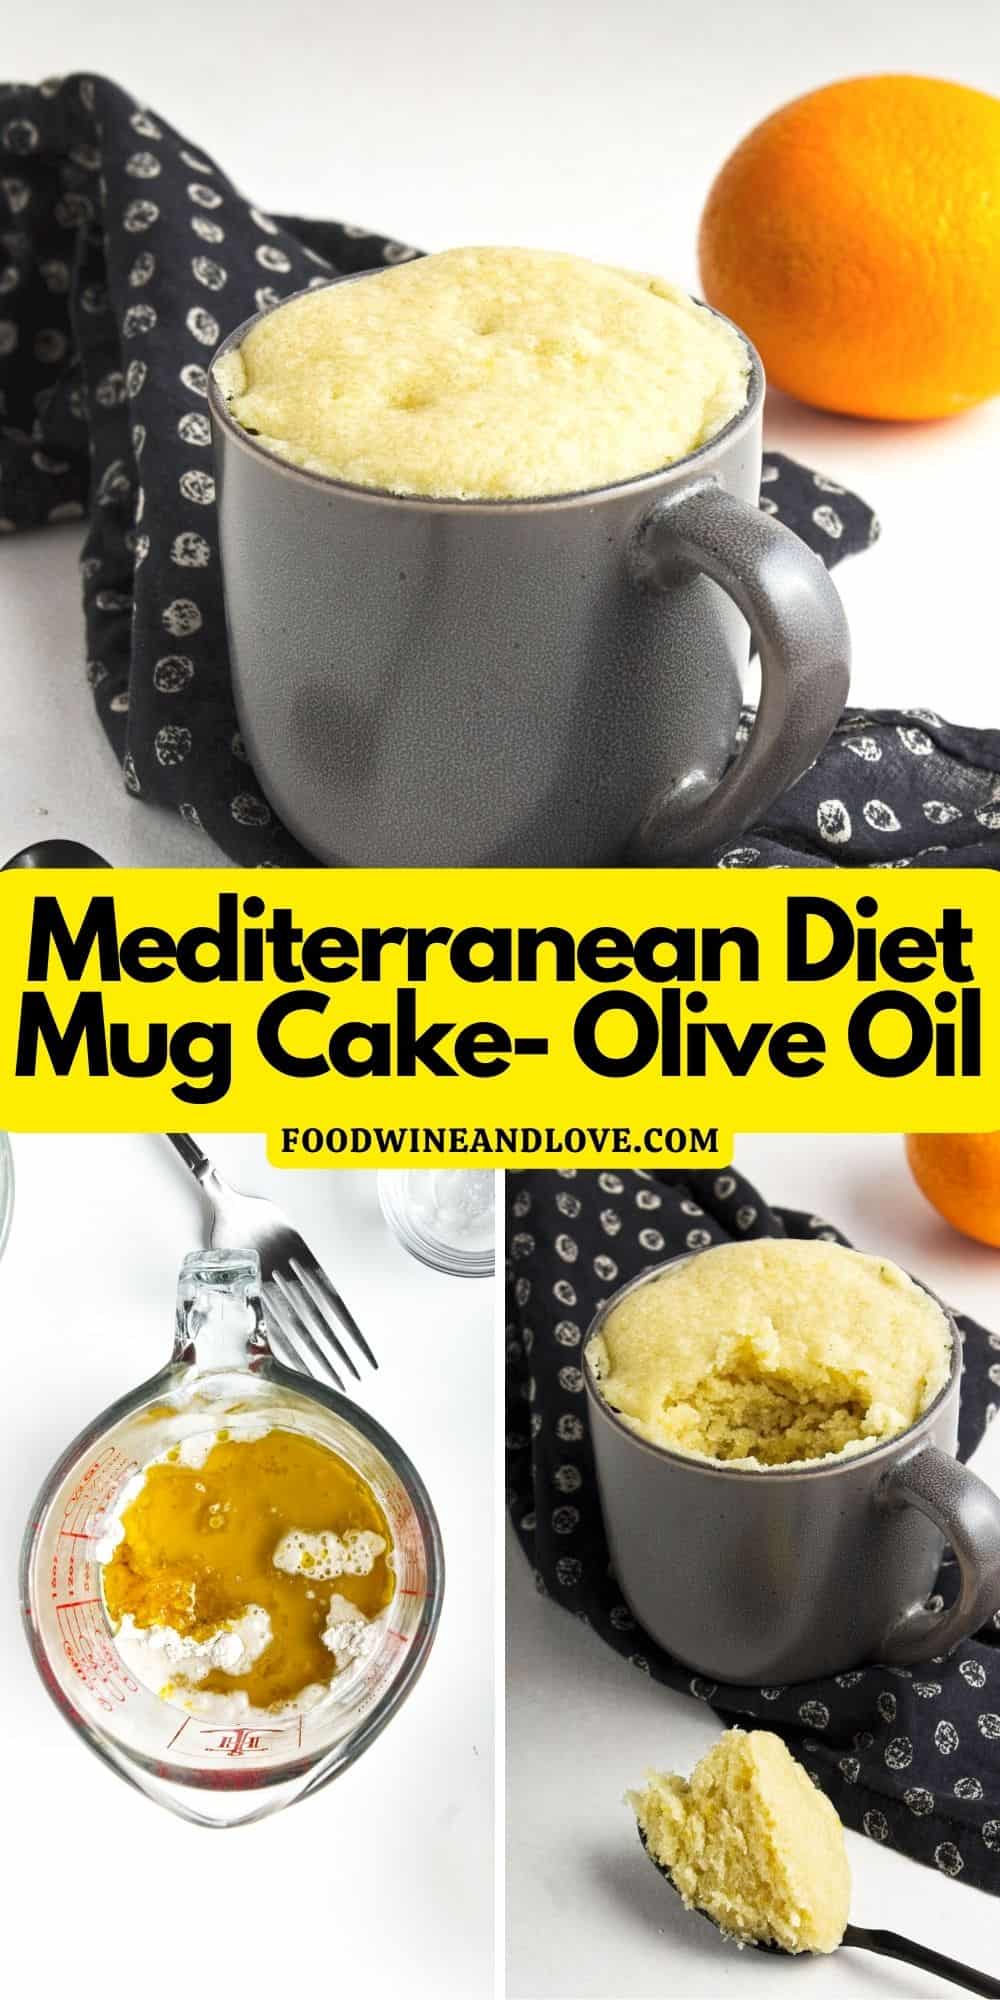 Mediterranean Diet Mug Cake, a six ingredient dessert or snack recipe for one made with olive oil and no dairy. Vegan, Vegetarian.